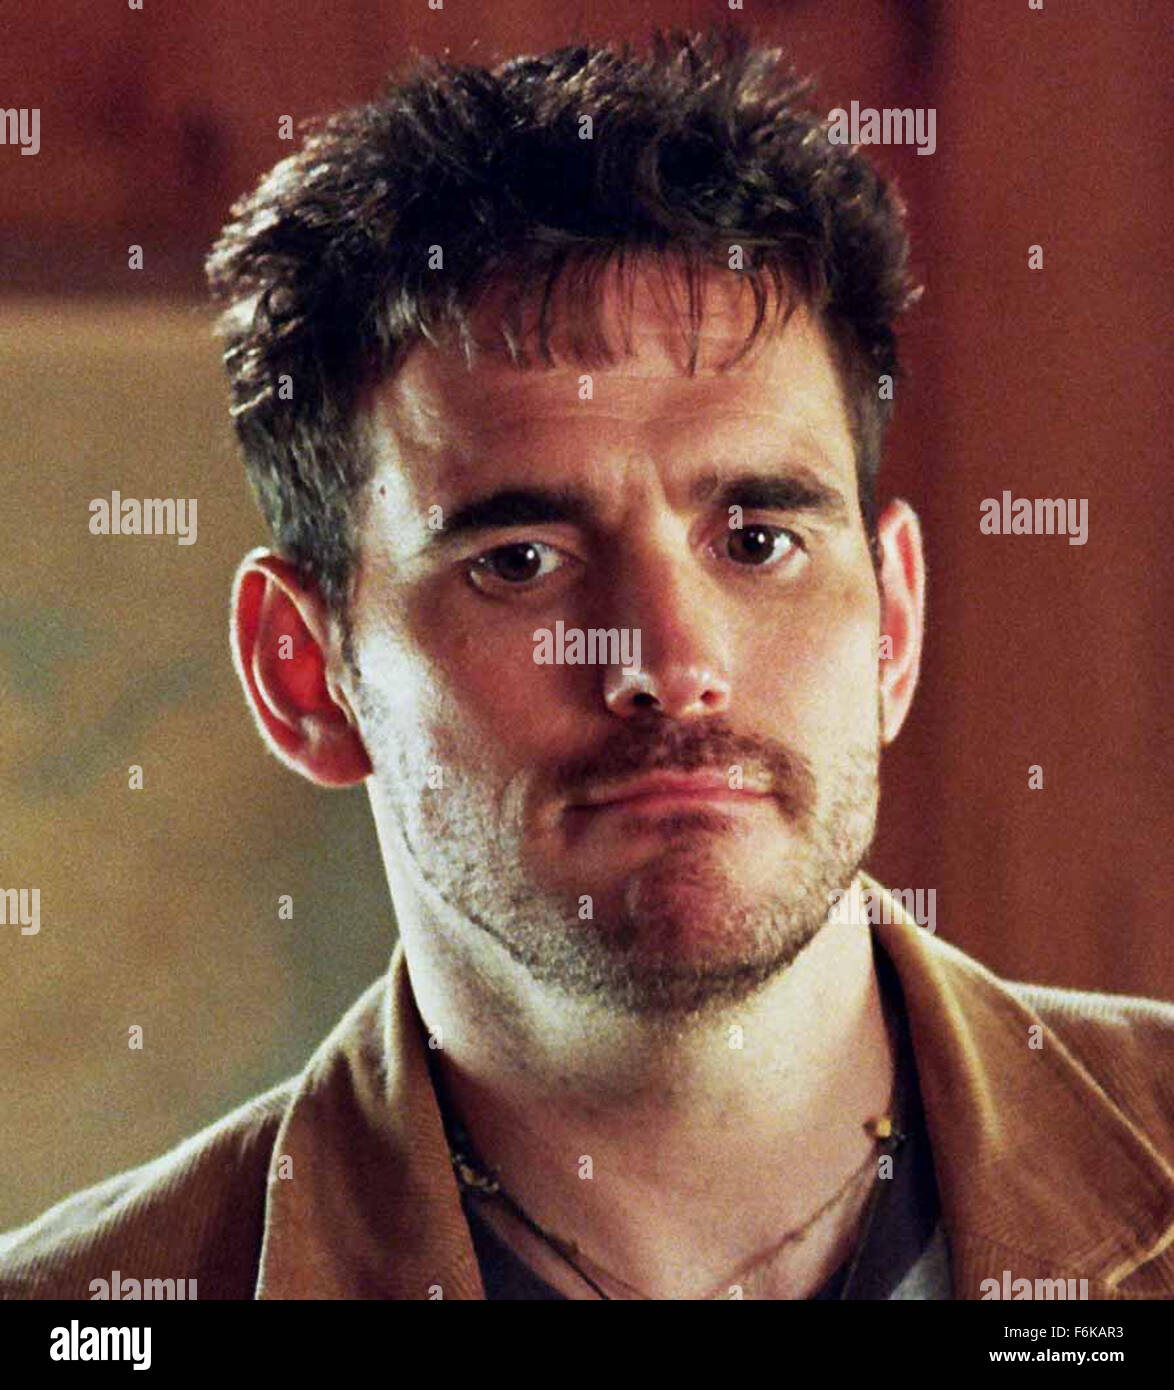 May 10, 2006; New York, NY, USA; Actor MATT DILLON as Mark in the Kevin Bacon directed drama, 'Loverboy.' Set to be released June 2, 2006. Mandatory Credit: Photo by Mixed Breed Films. (c) Copyright 2006 by Courtesy of Mixed Breed Films Stock Photo